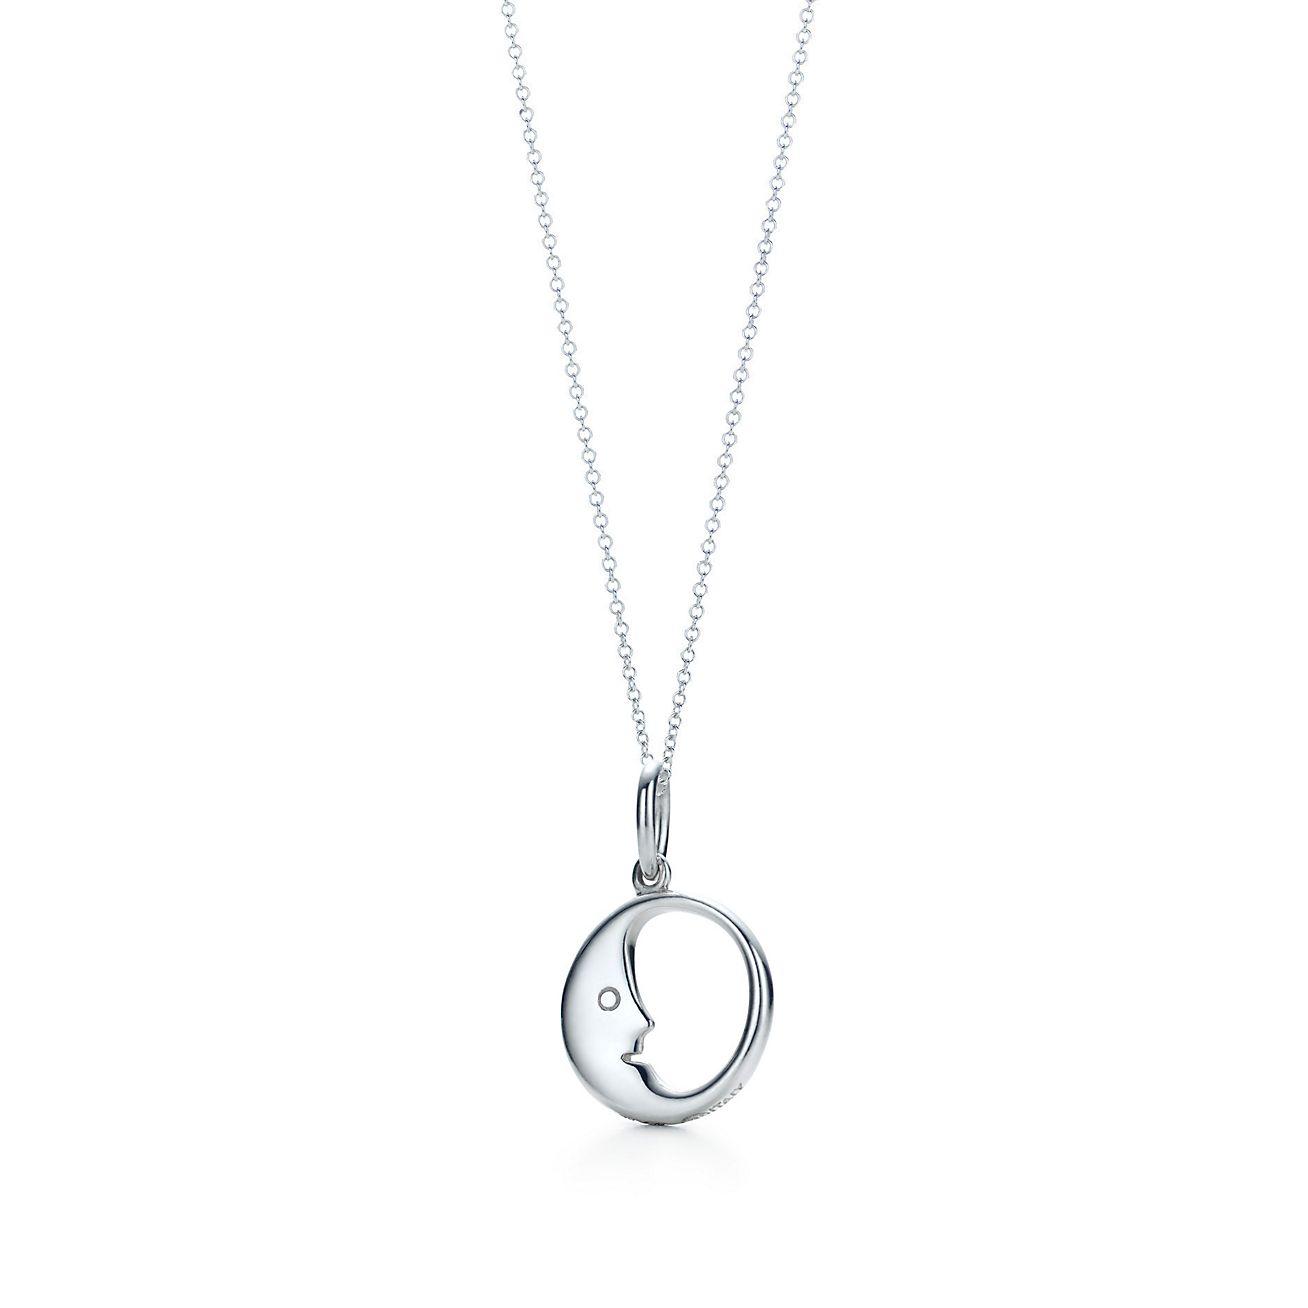 Moon charm in sterling silver 